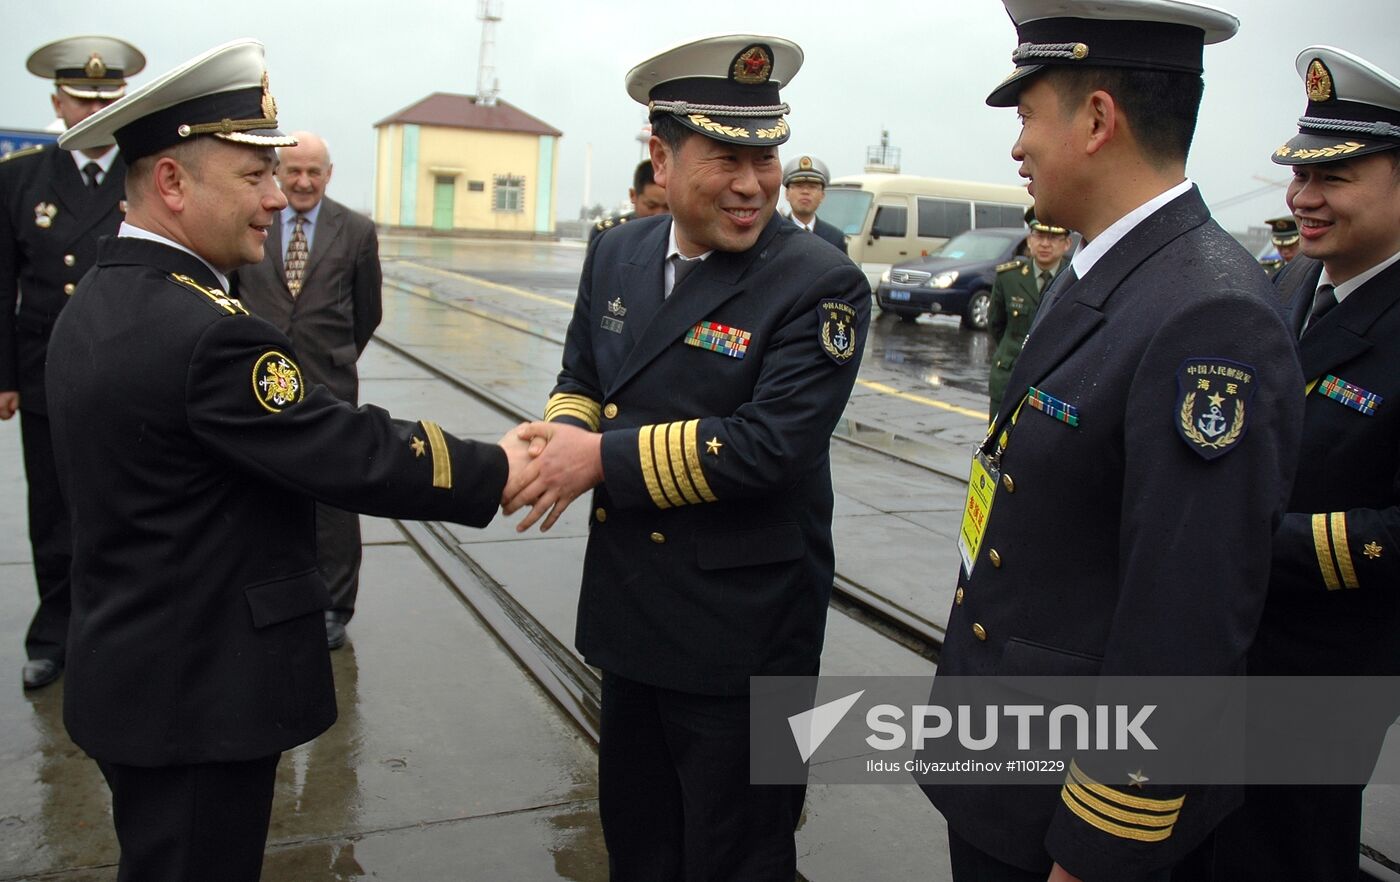 Russian-Chinese naval exercises "Sea Cooperation 2012"